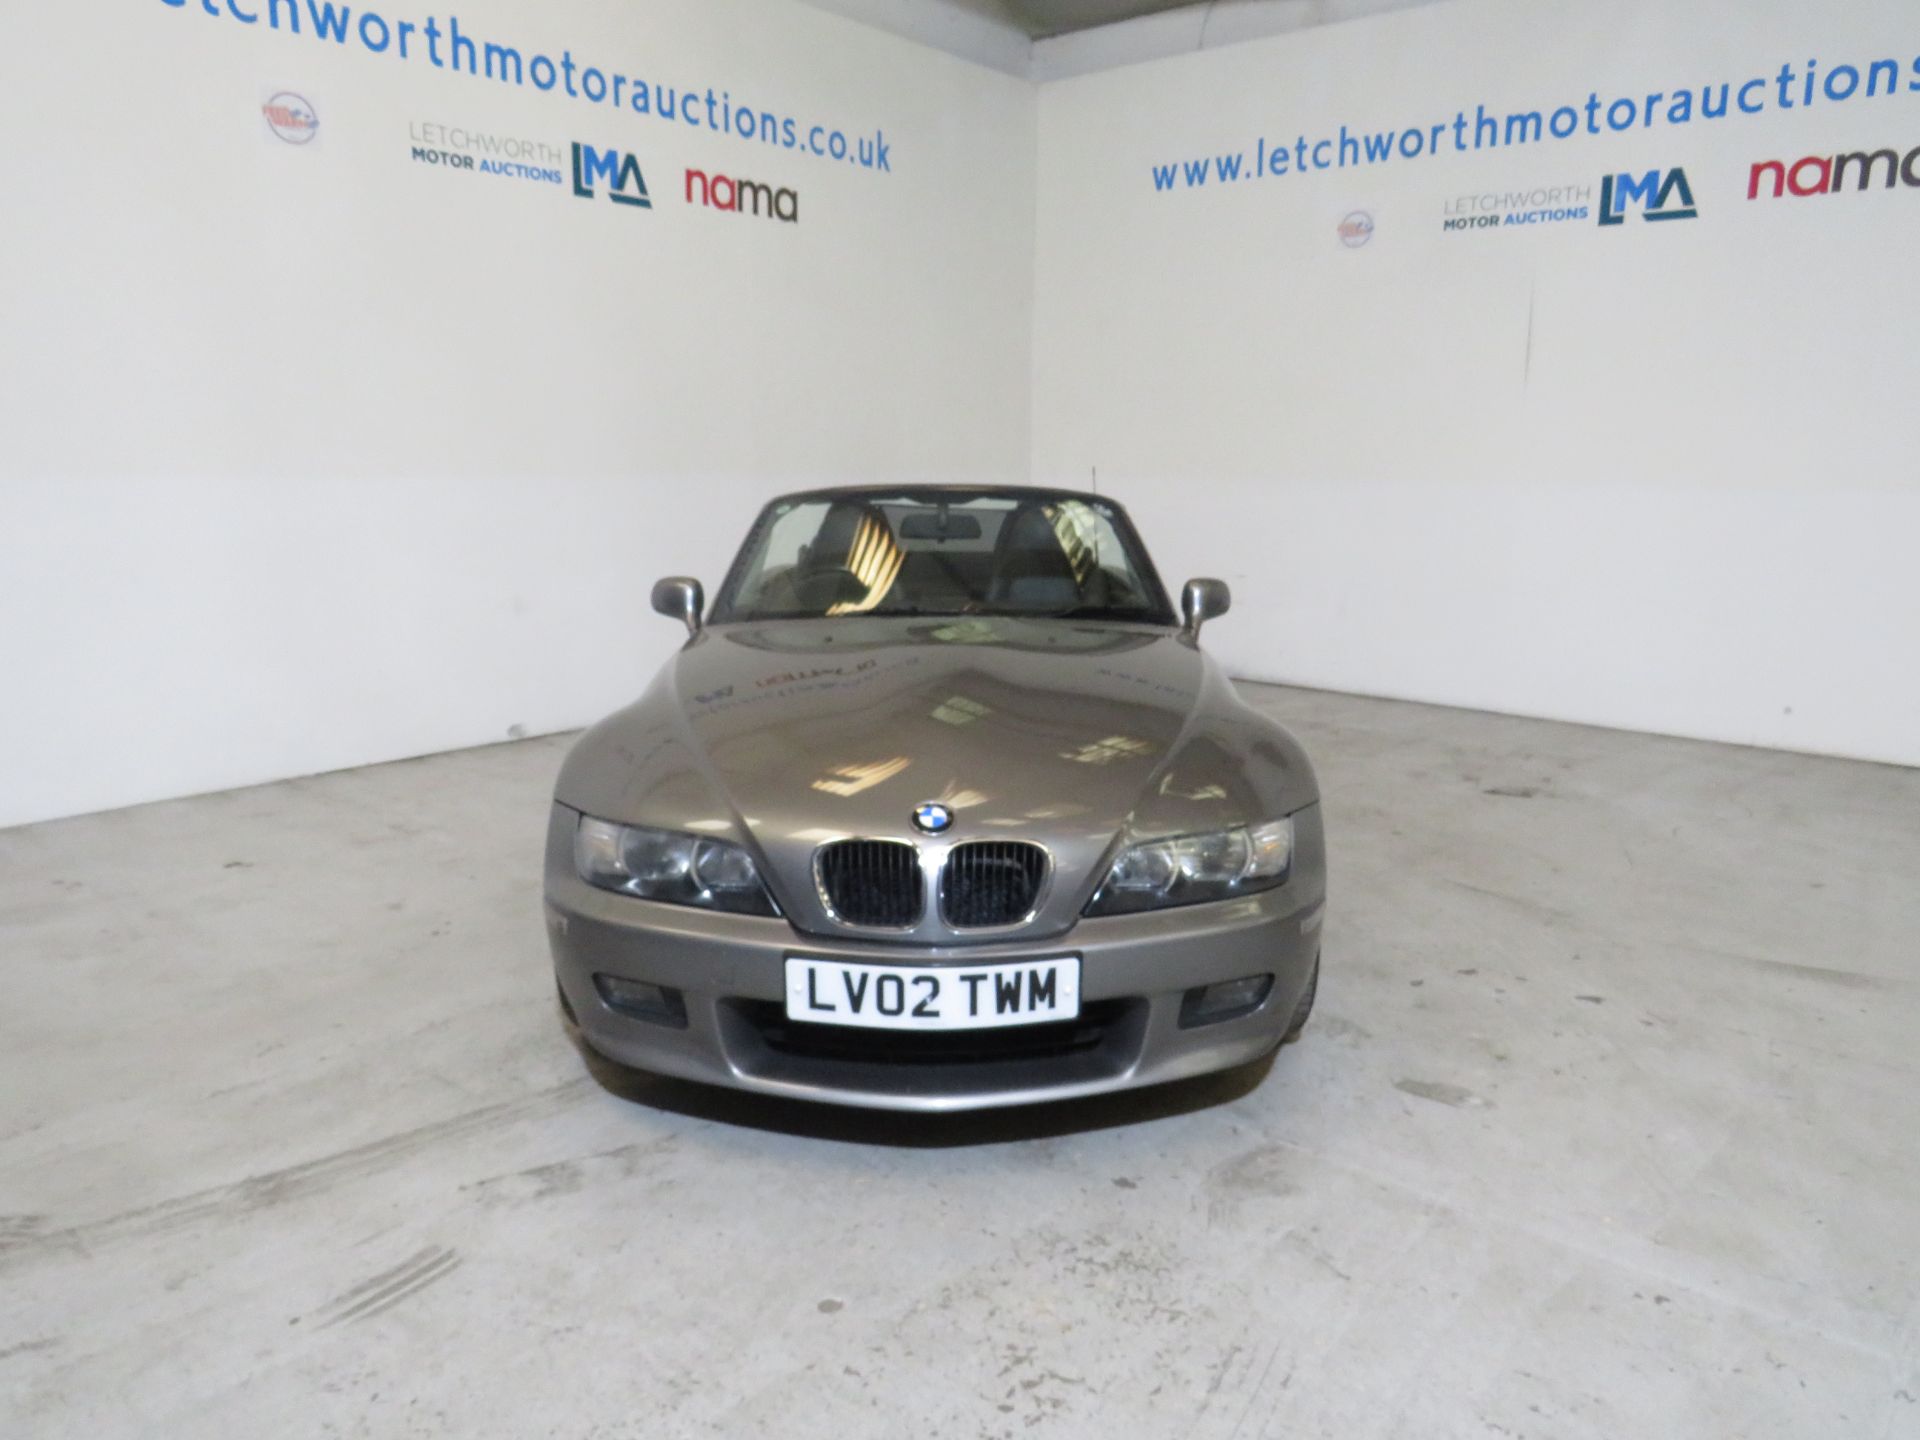 2002 BMW Z3 Convertible 2171cc - Image 3 of 21